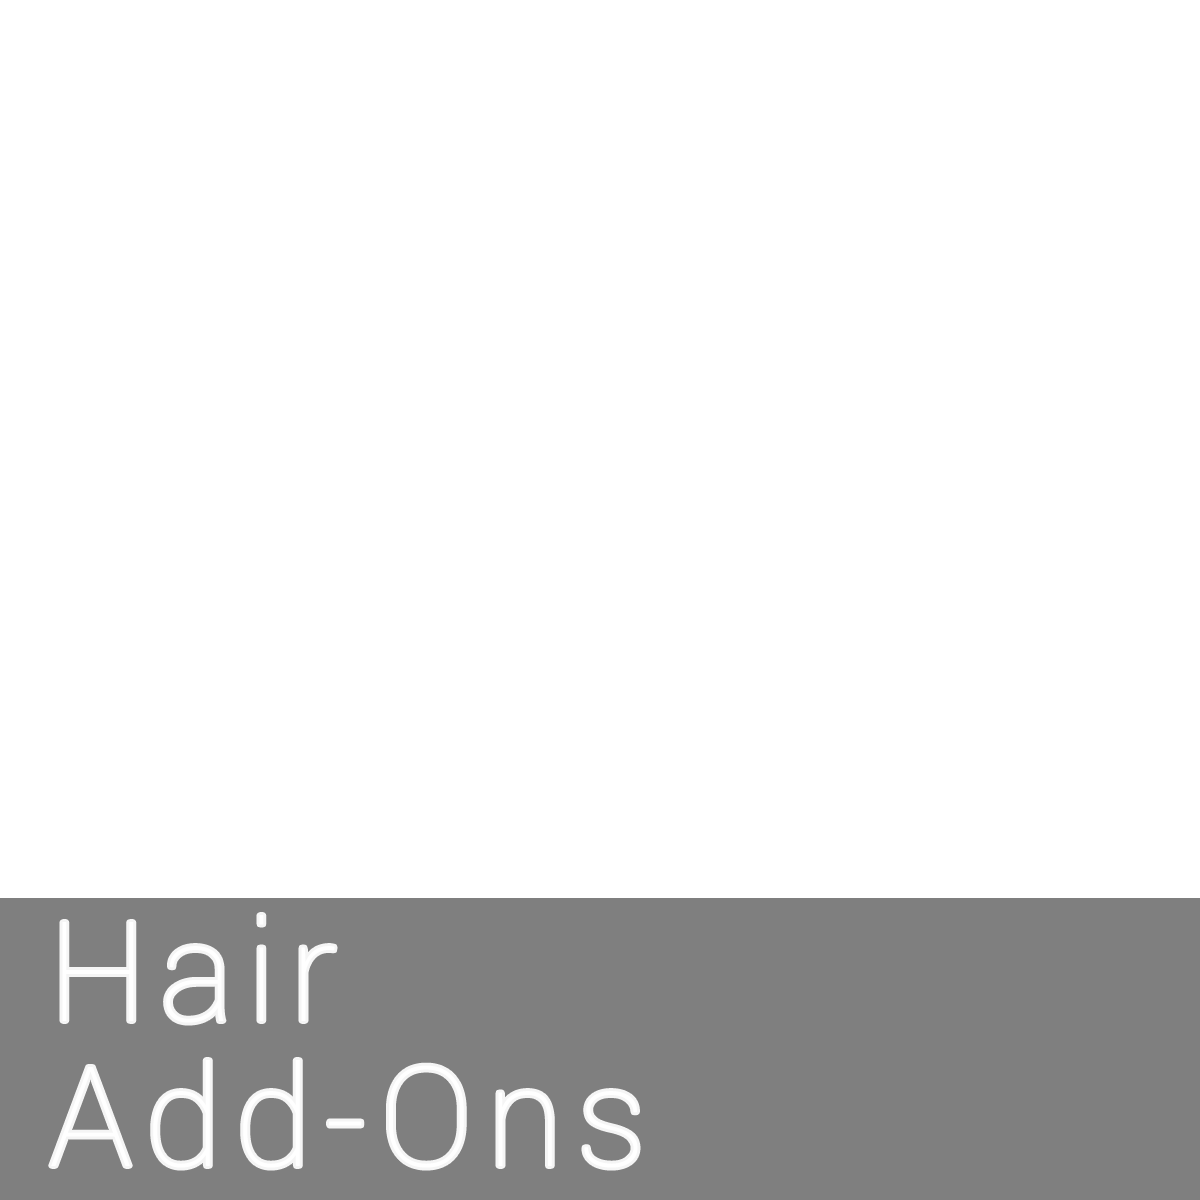 voga-wigs-and-hair-add-ons-home-page-box-link-hair-add-ons